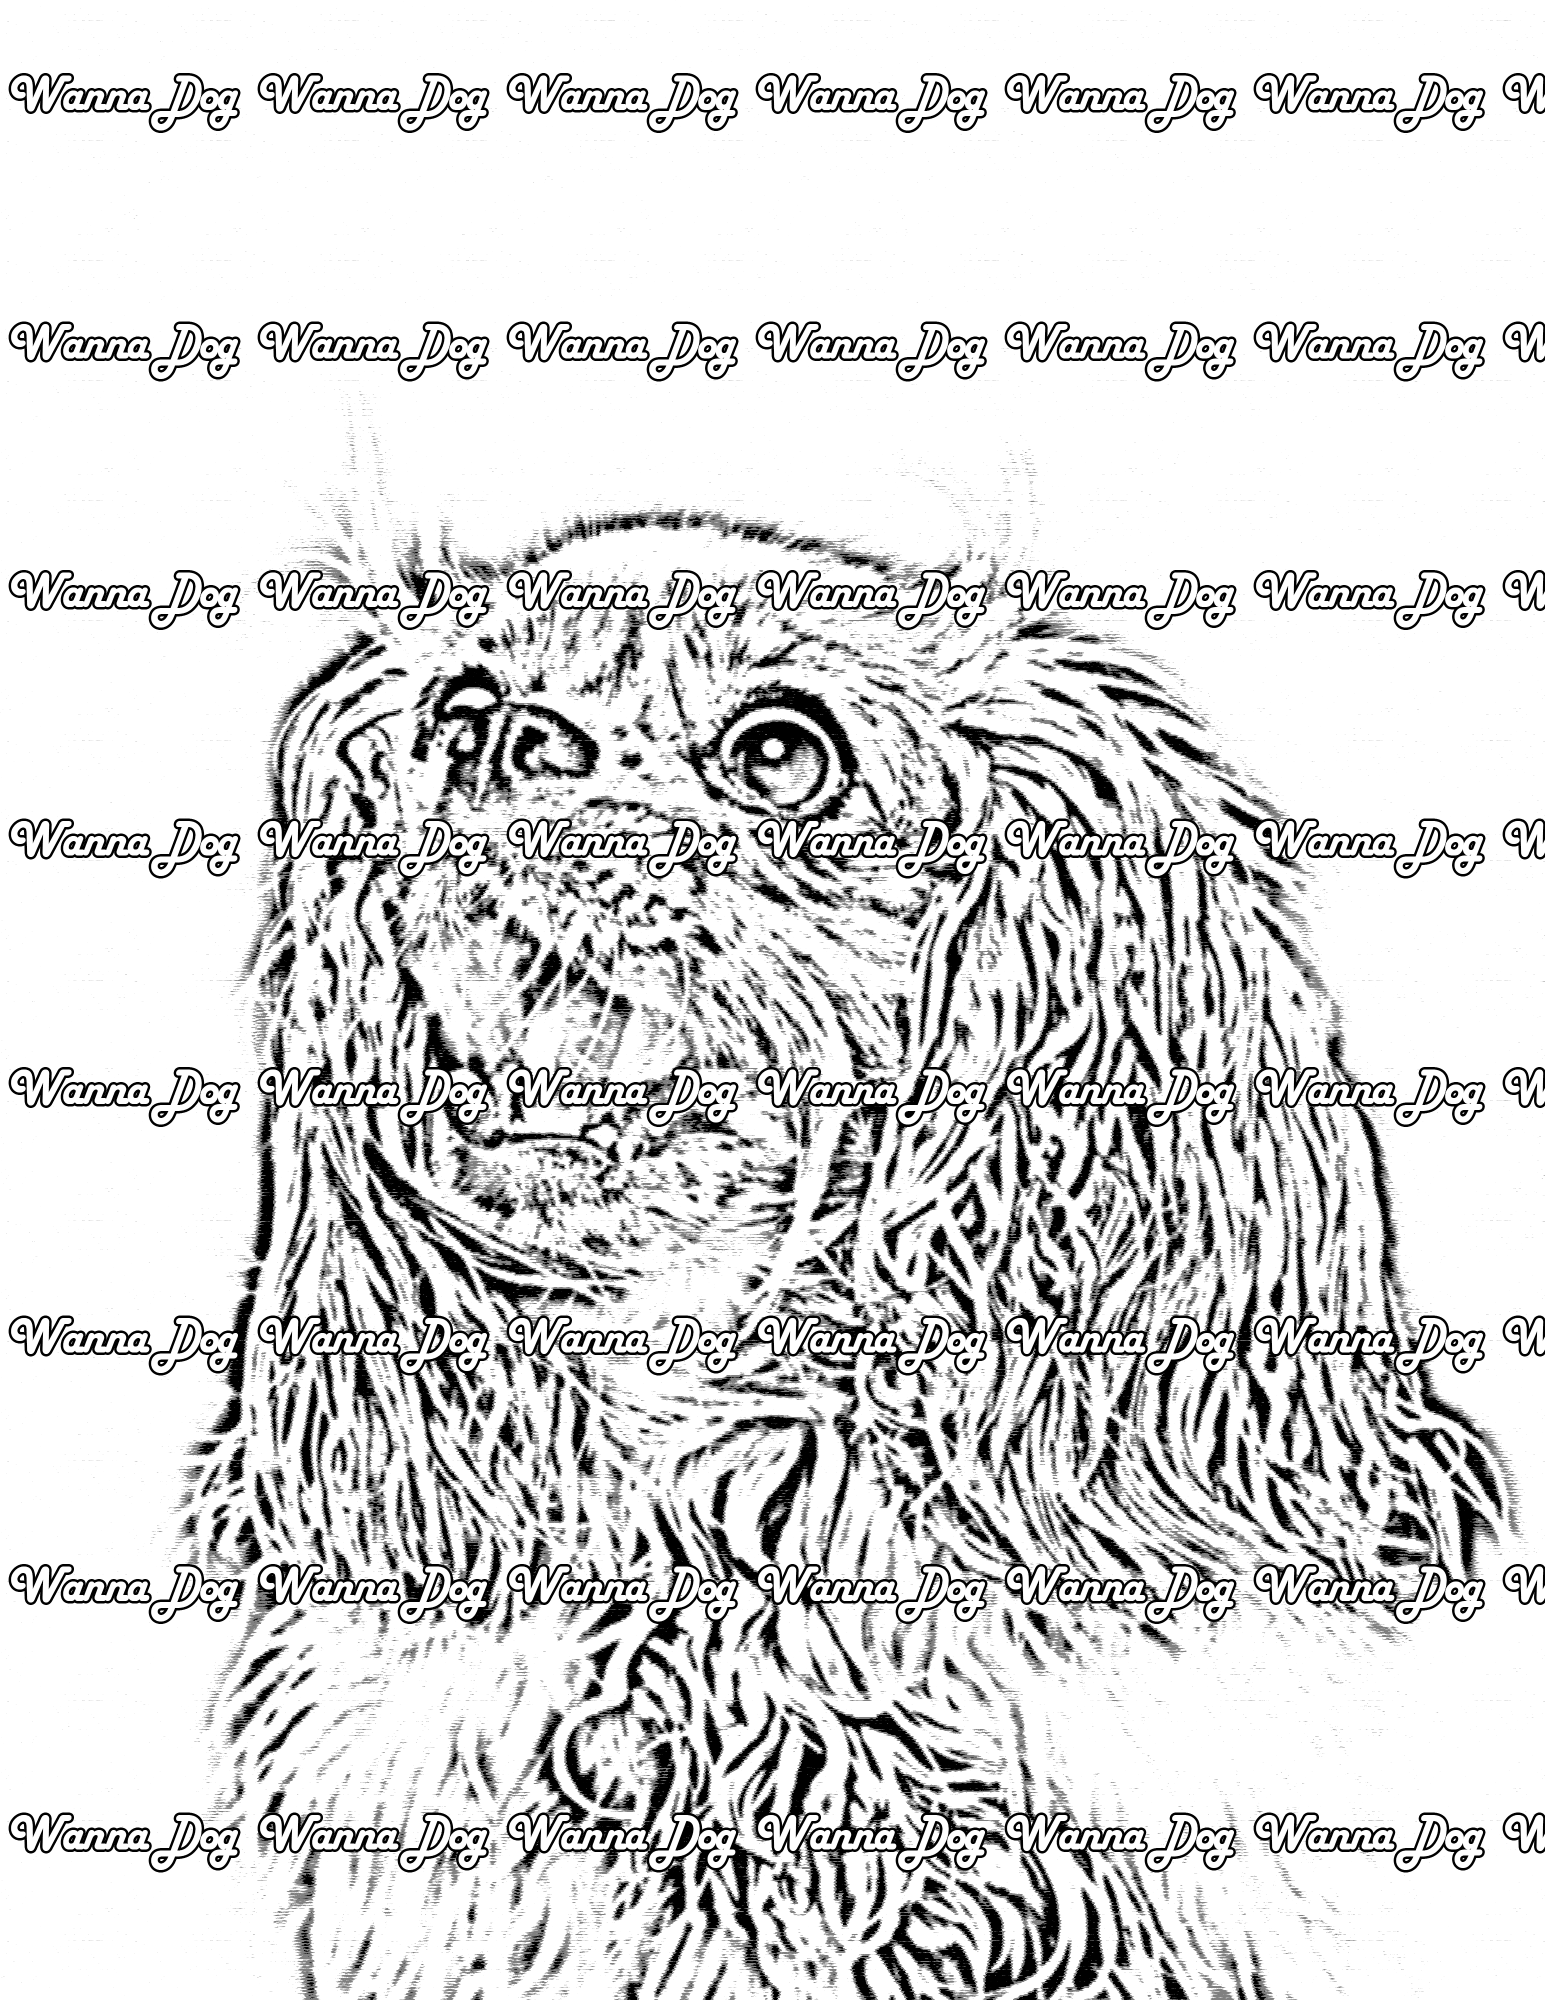 Cavalier King Charles Spaniel Coloring Page of a Cavalier King Charles Spaniel with wide eyes